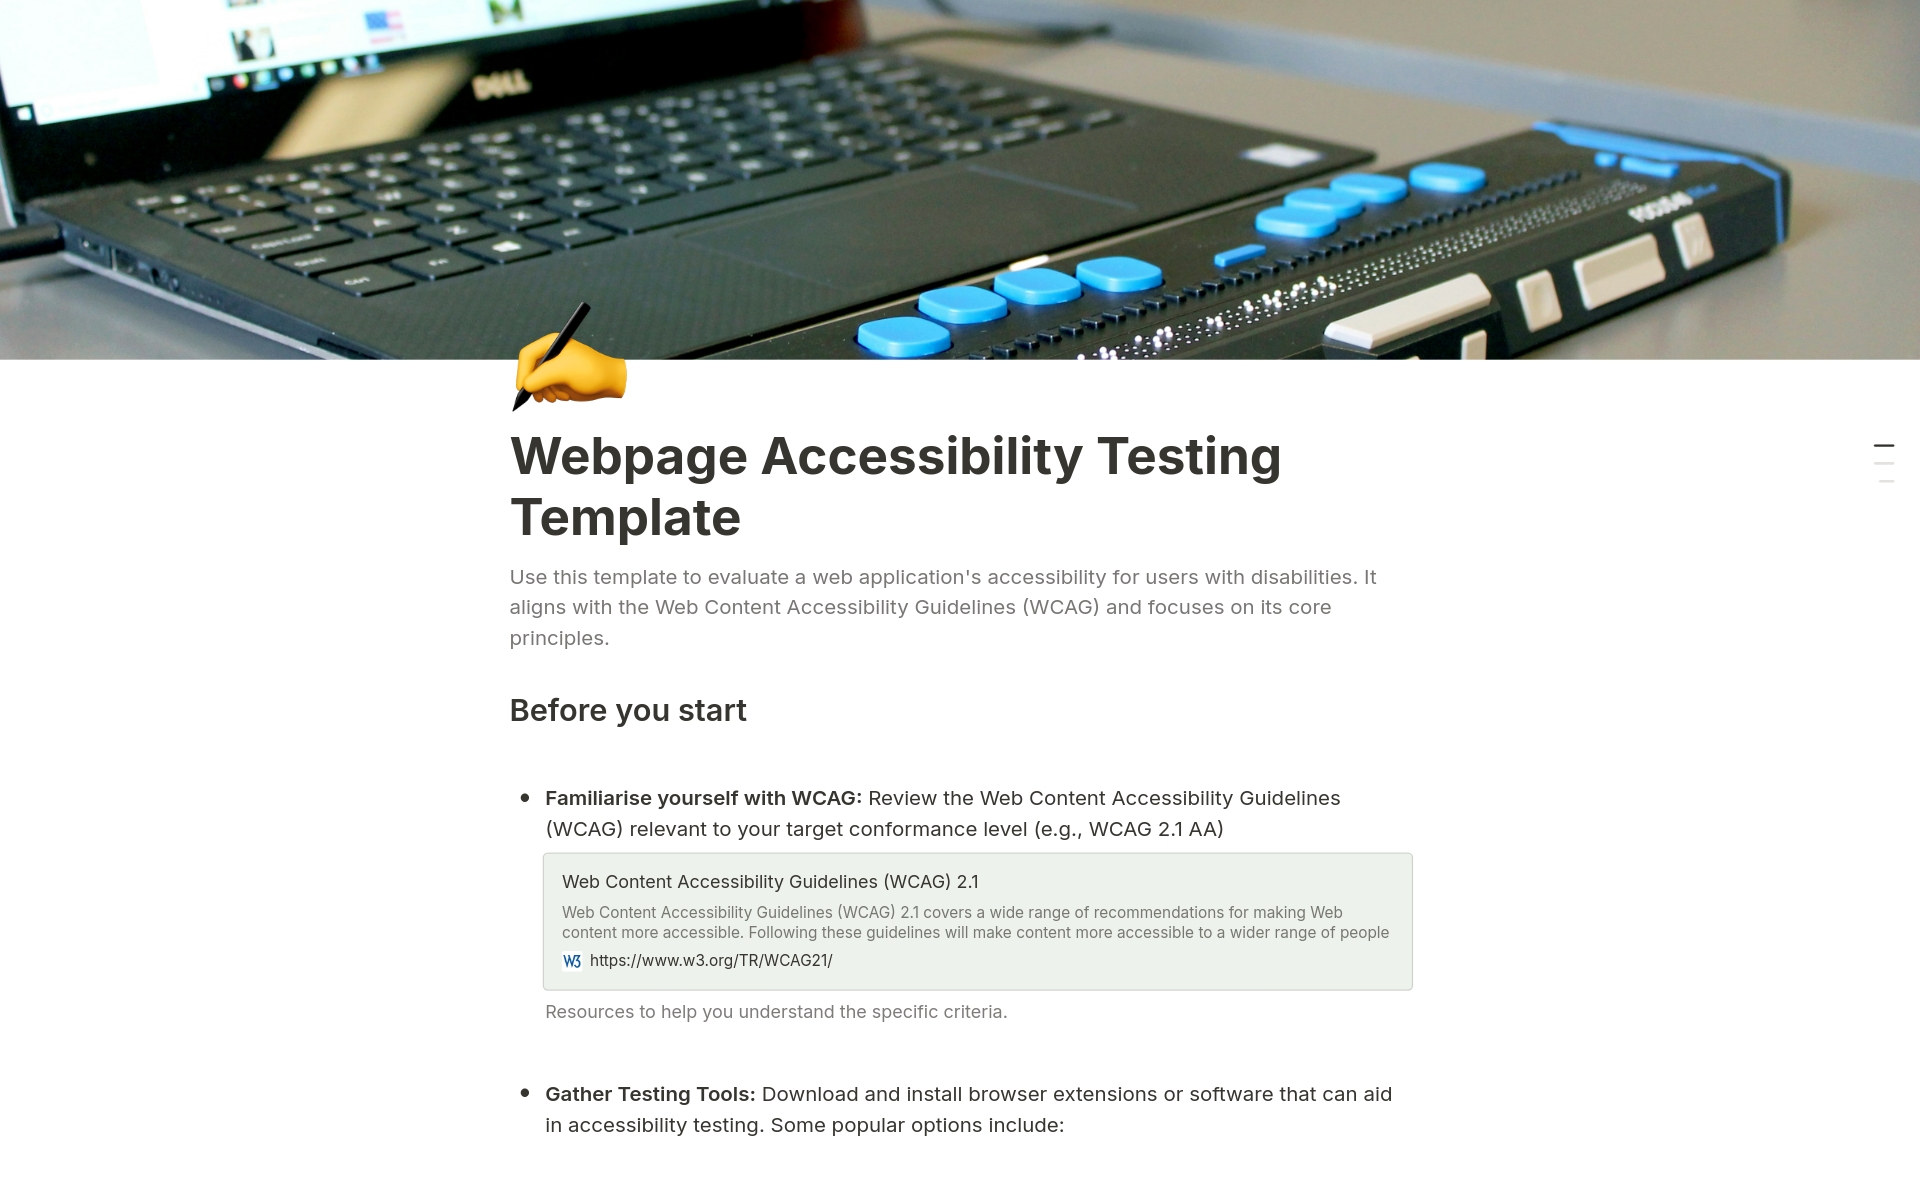 A template preview for Webpage Accessibility Testing